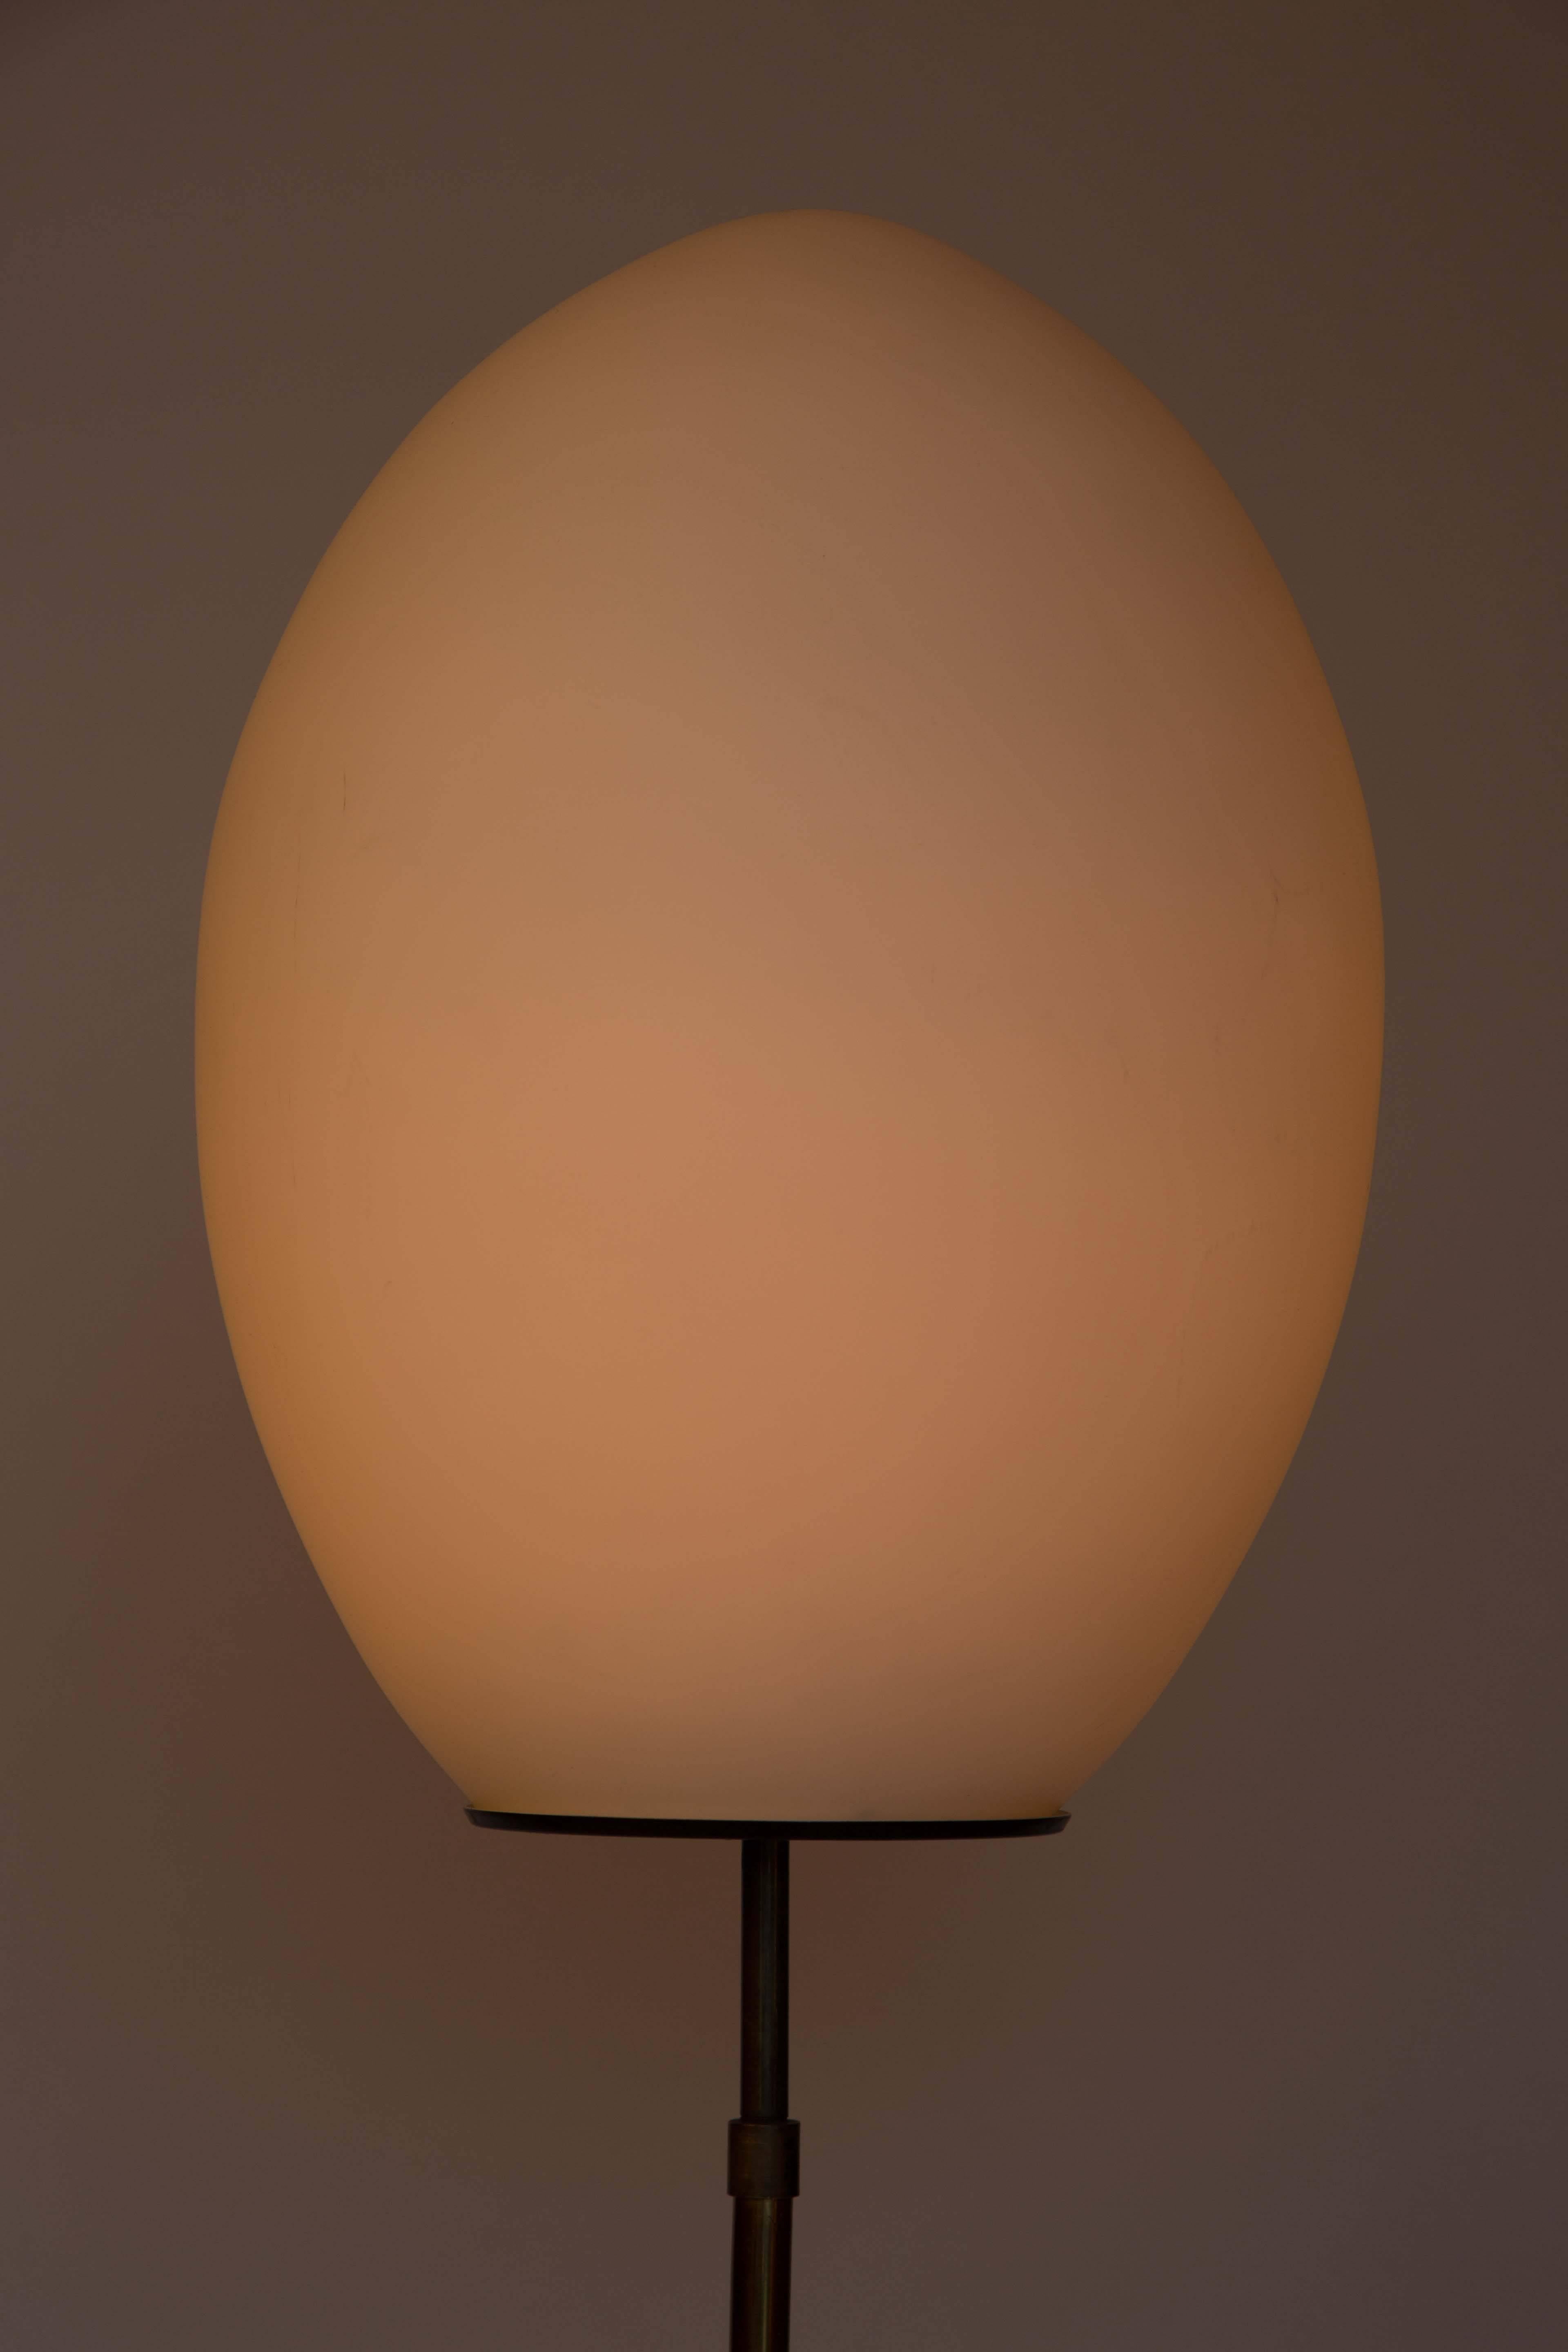 1950s Uovo floor lamp attributed to Fontana Arte. Executed in handblown opaline matte glass, patinated brass and marble. This quintessentially mid-century Italian vintage design is Minimalist yet ultra refined, consistent with the designs of Max